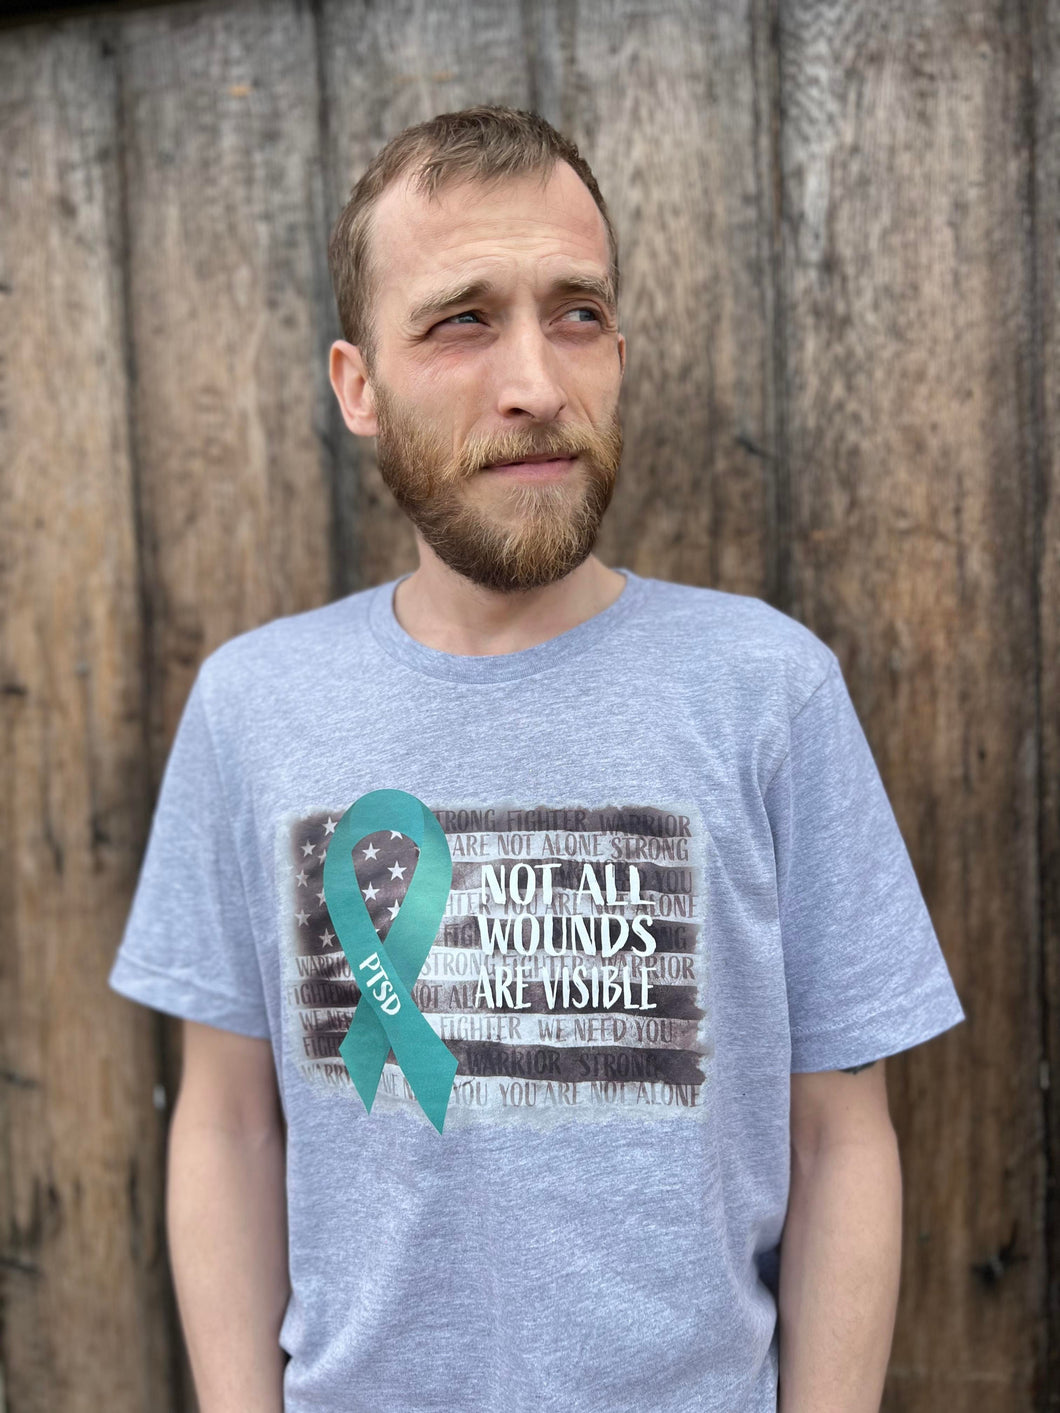 Not All Wounds Are Visible (PTSD) Adult Shirt